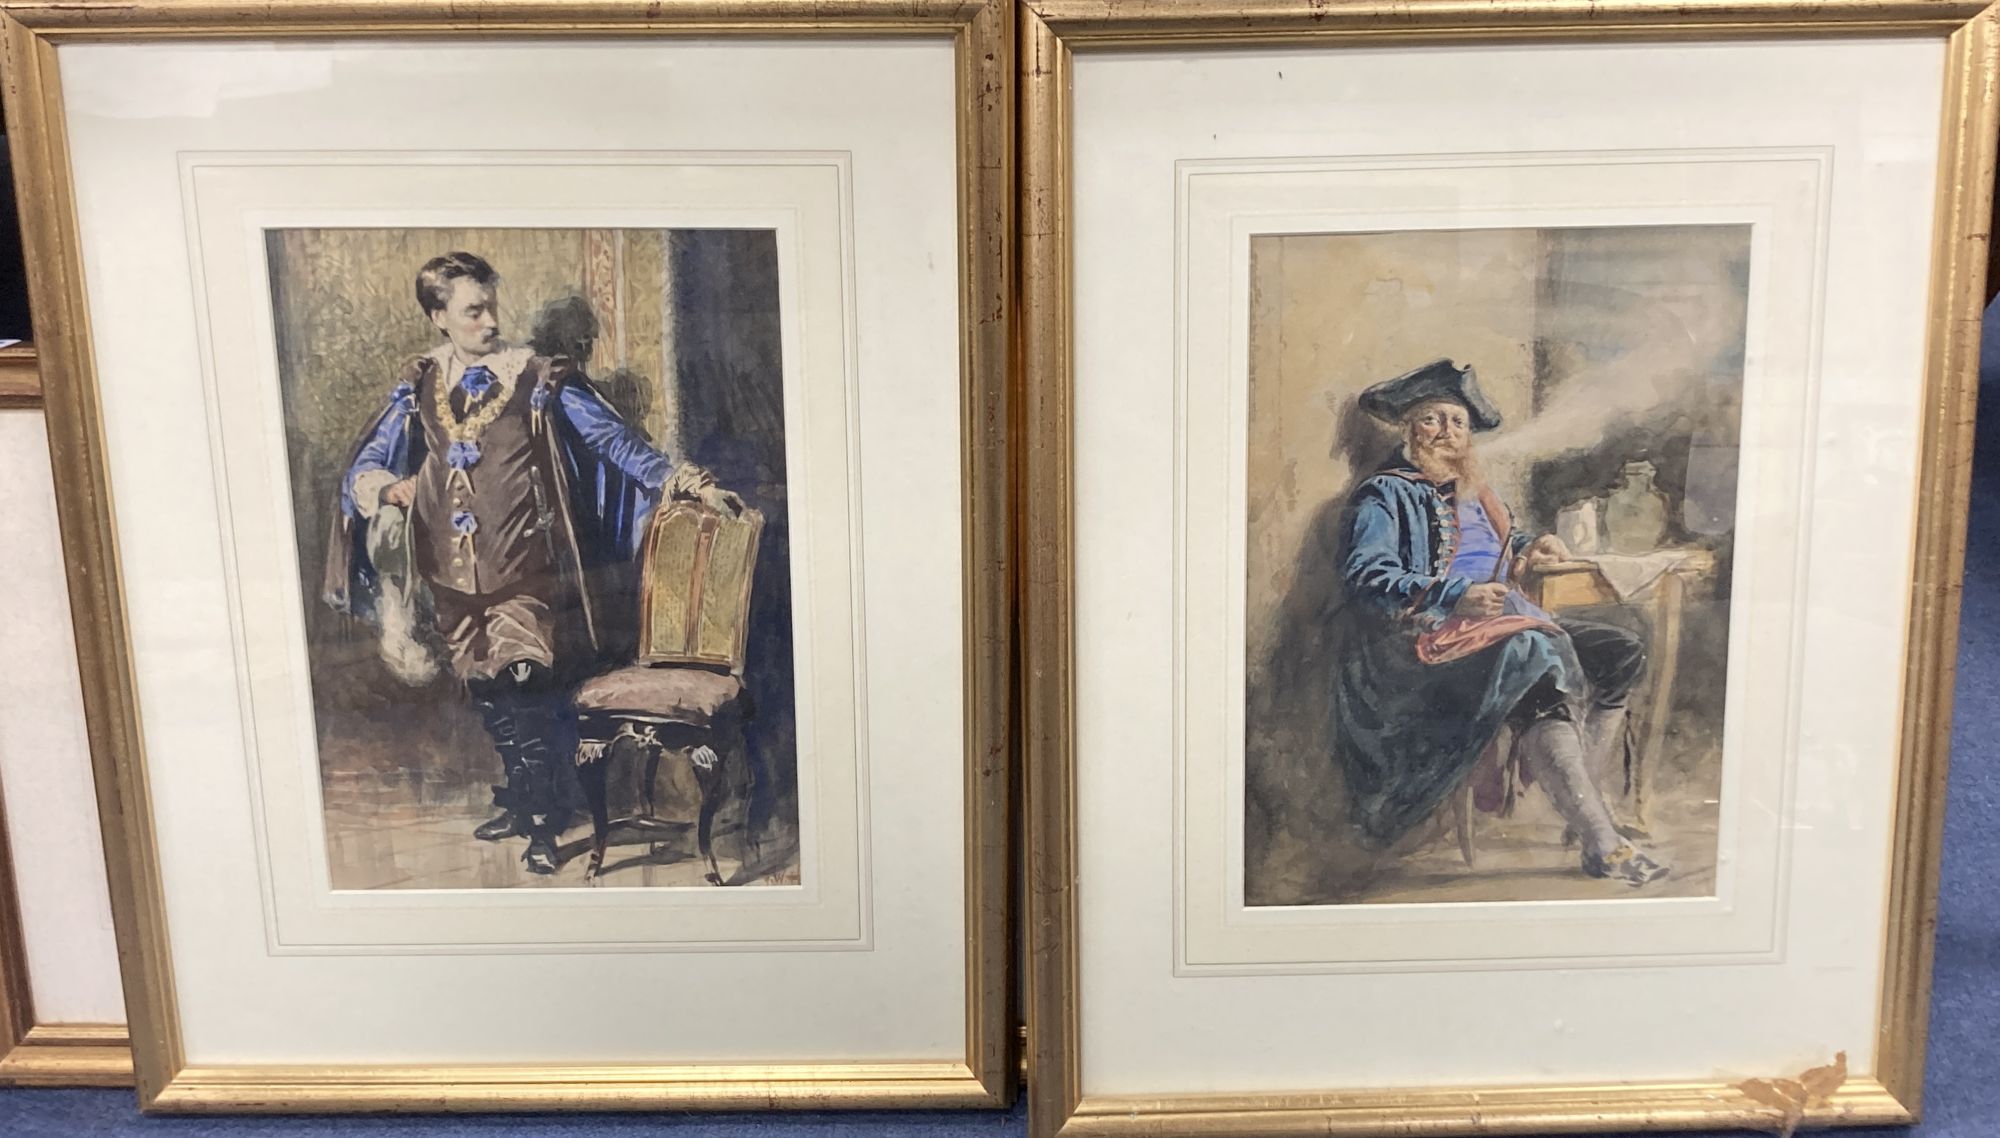 F.W.H circa 1900, pair of watercolours, 17th century sea captain and gallant, one initialled, 31 x 22cm.